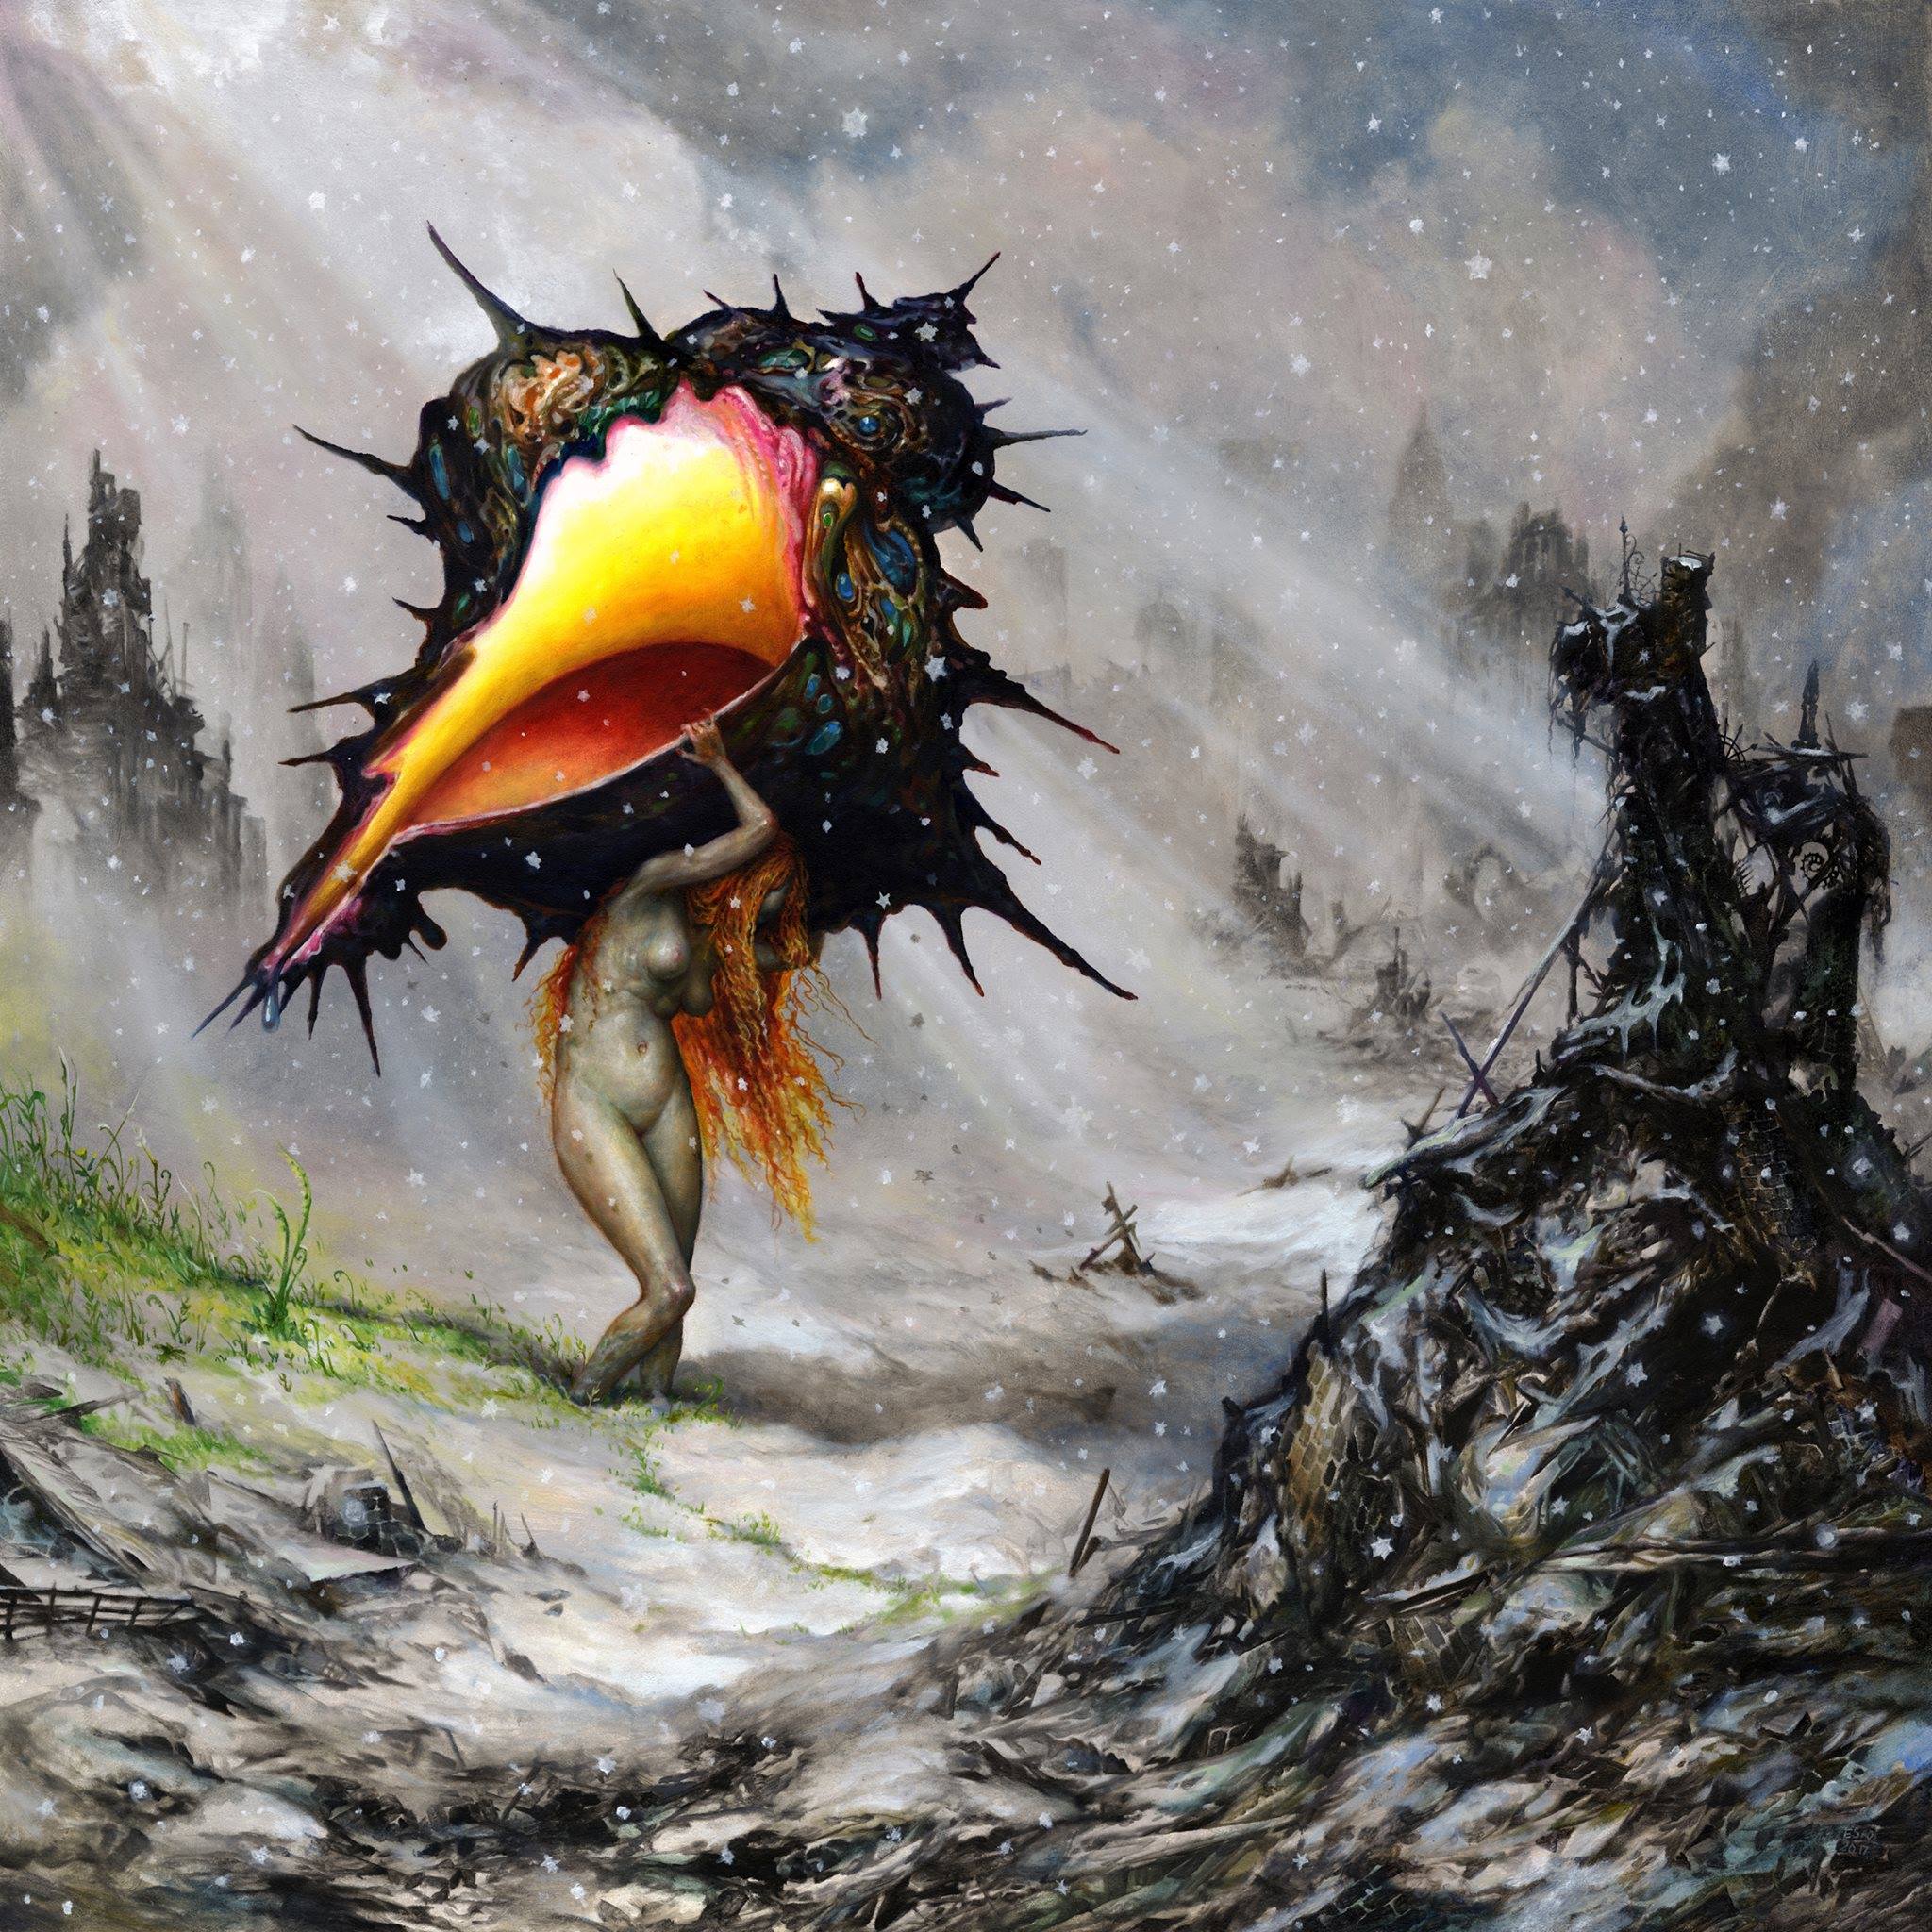 Circa Survive- Long Awaited and Exceeding Expectations